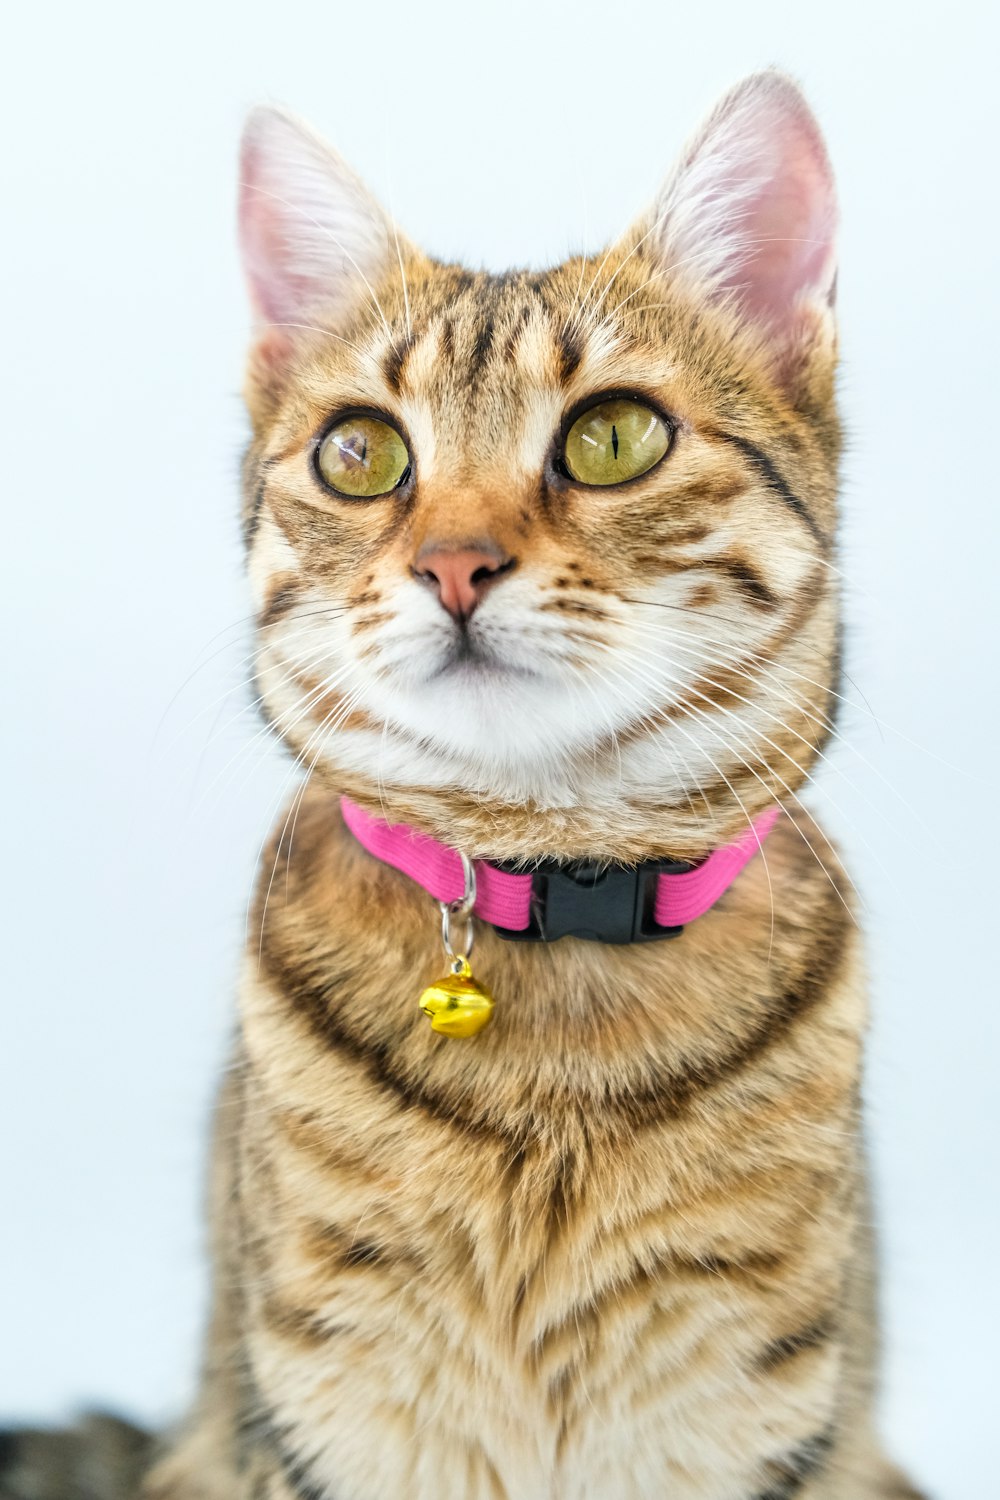 a close up of a cat wearing a pink collar